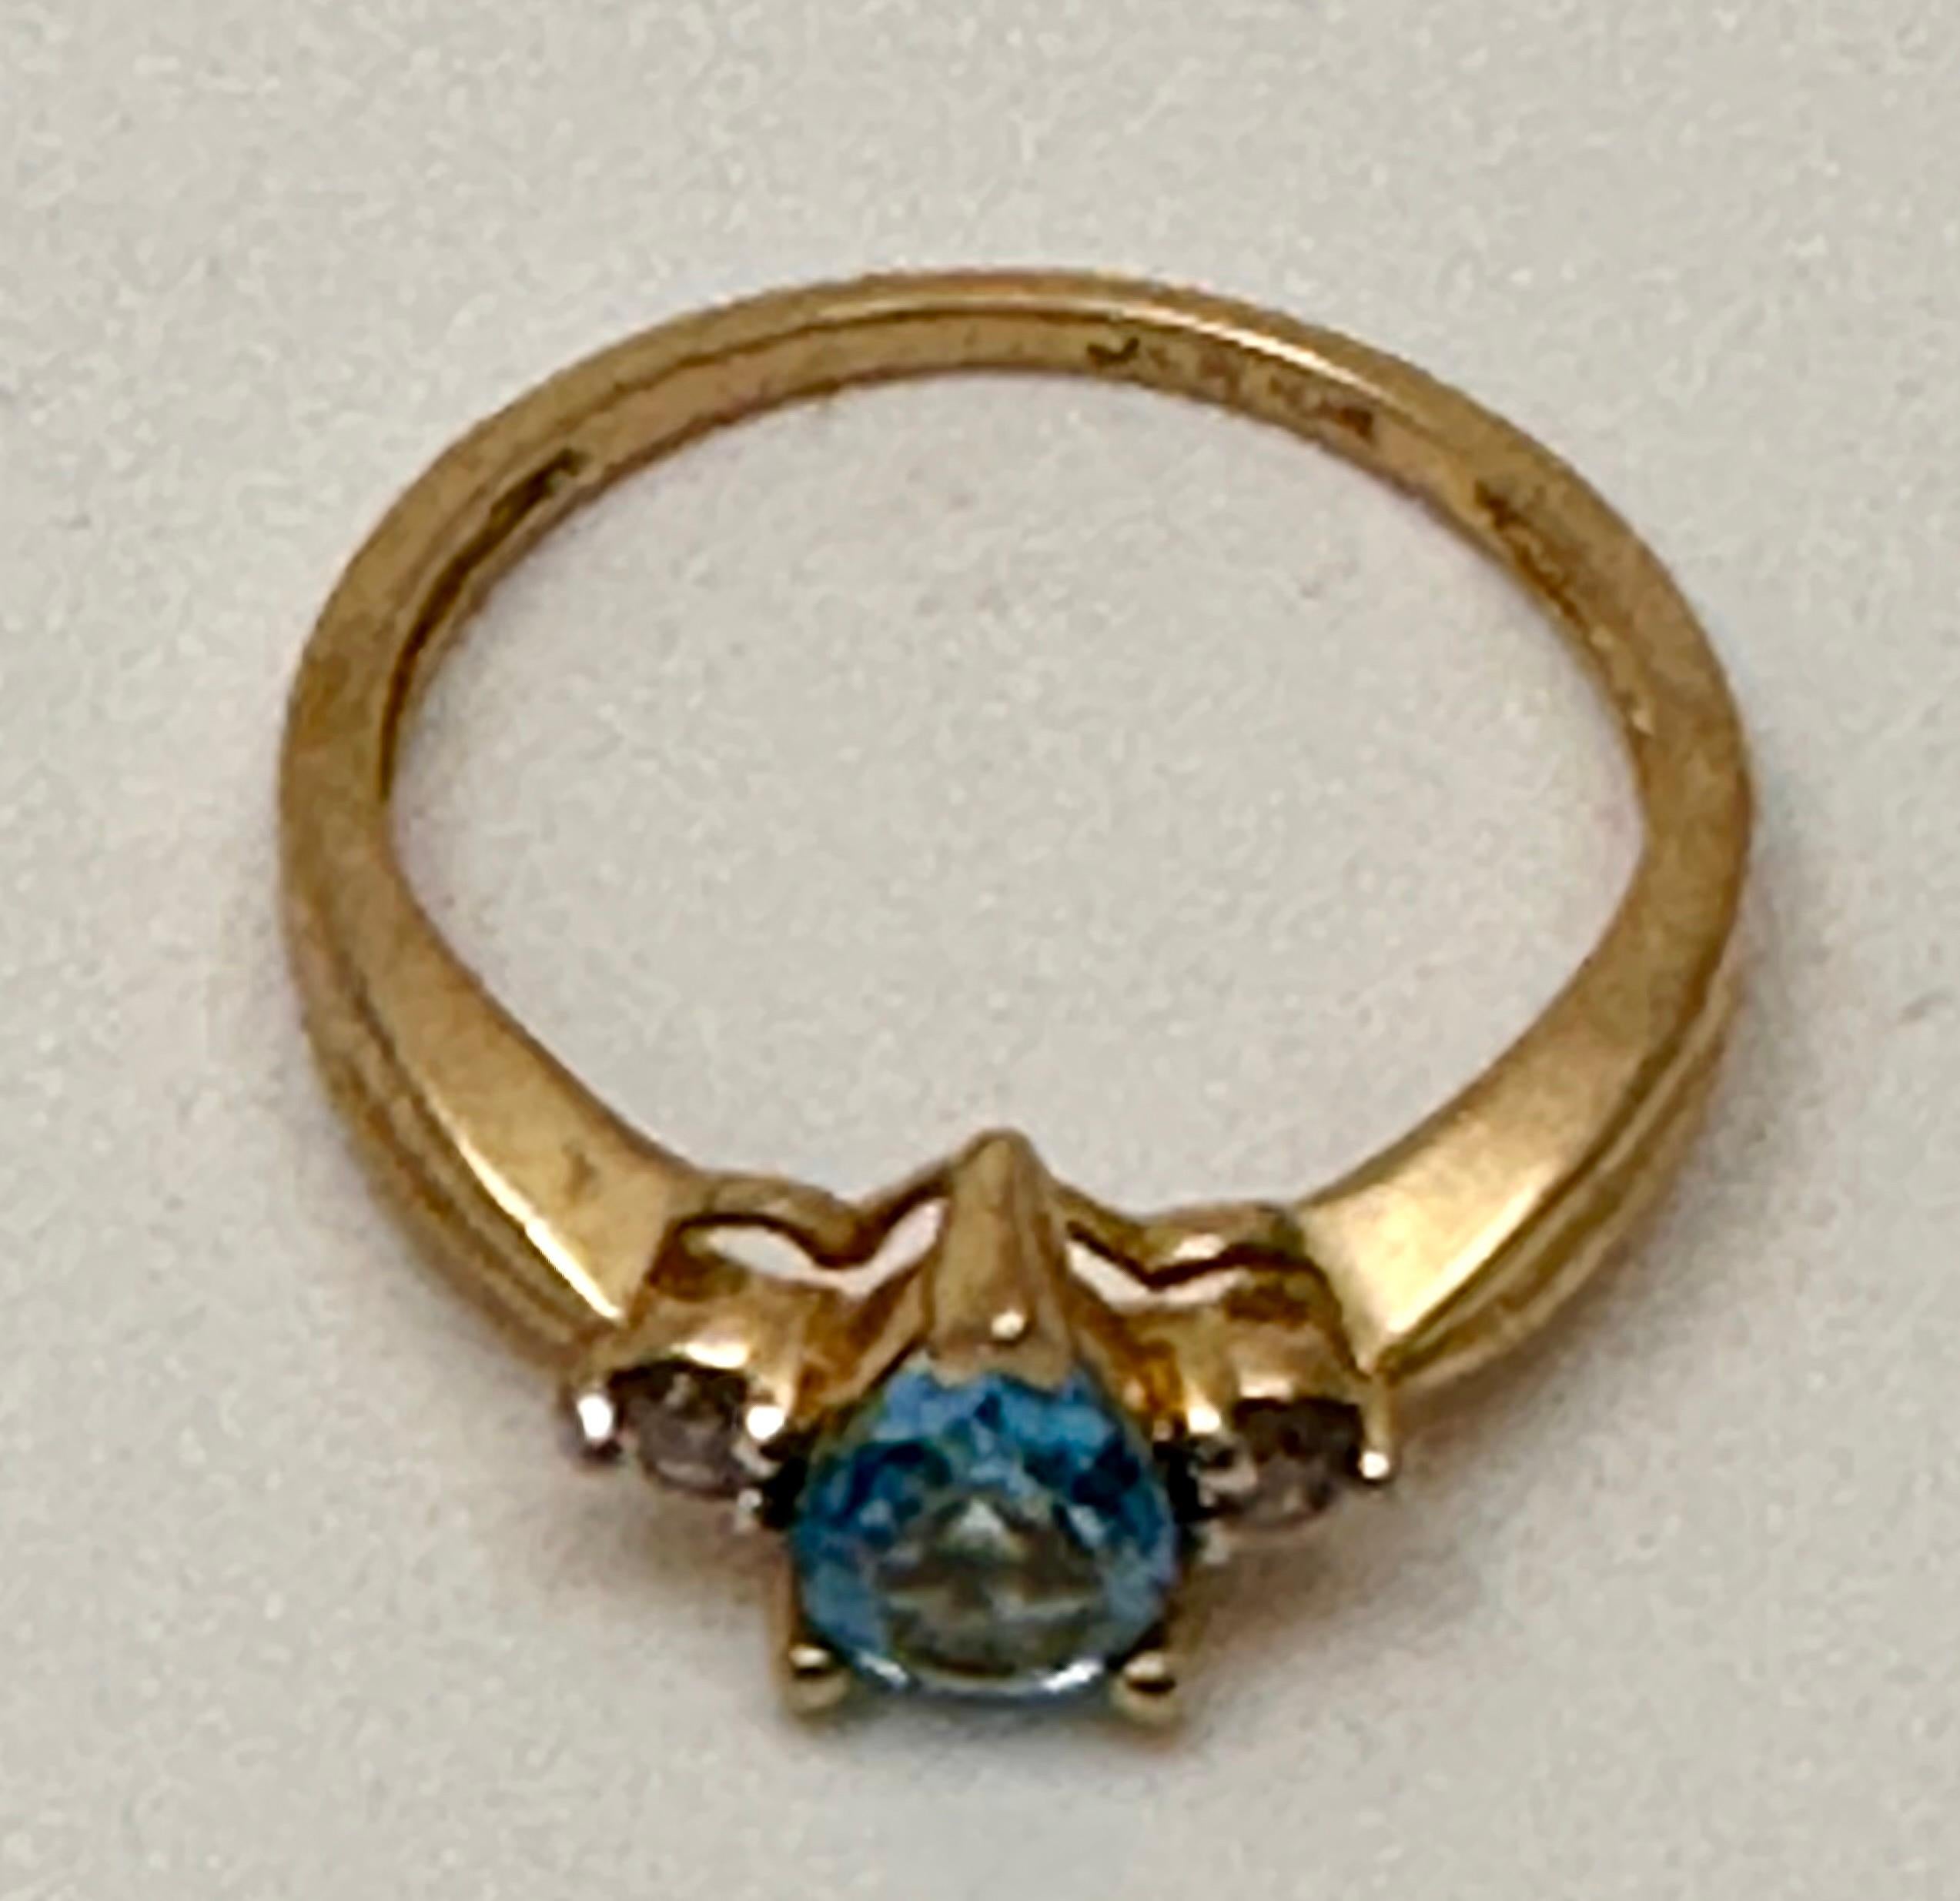 10k Yellow Gold 5mm x 7mm Pear Blue Topaz 2 Round Diamond Ring Size 7 For Sale 1